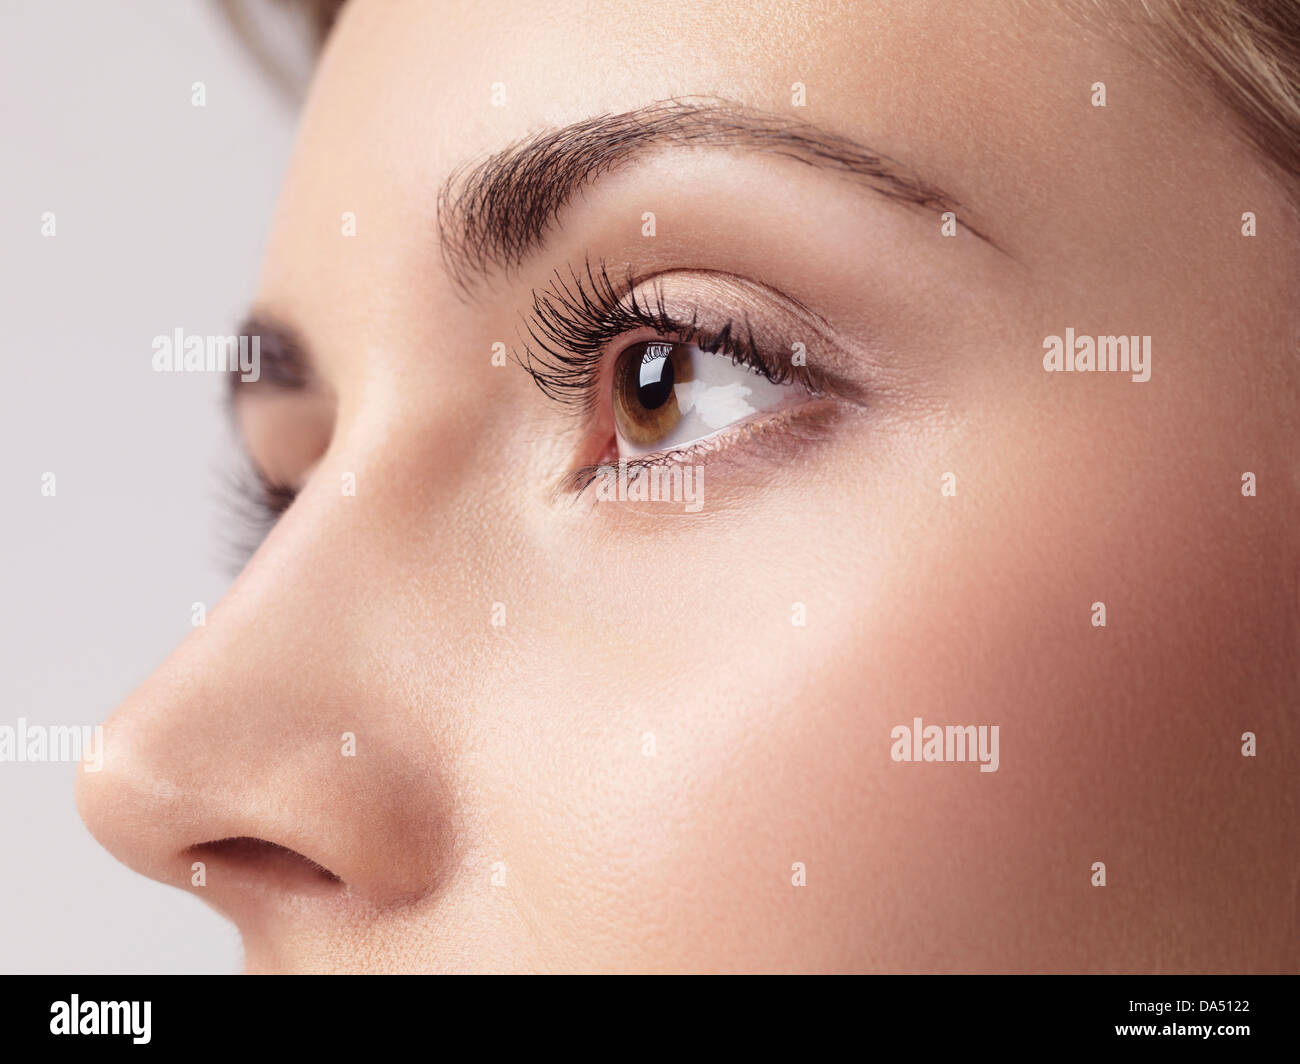 Closeup of a young woman eye with long eyelashes Stock Photo